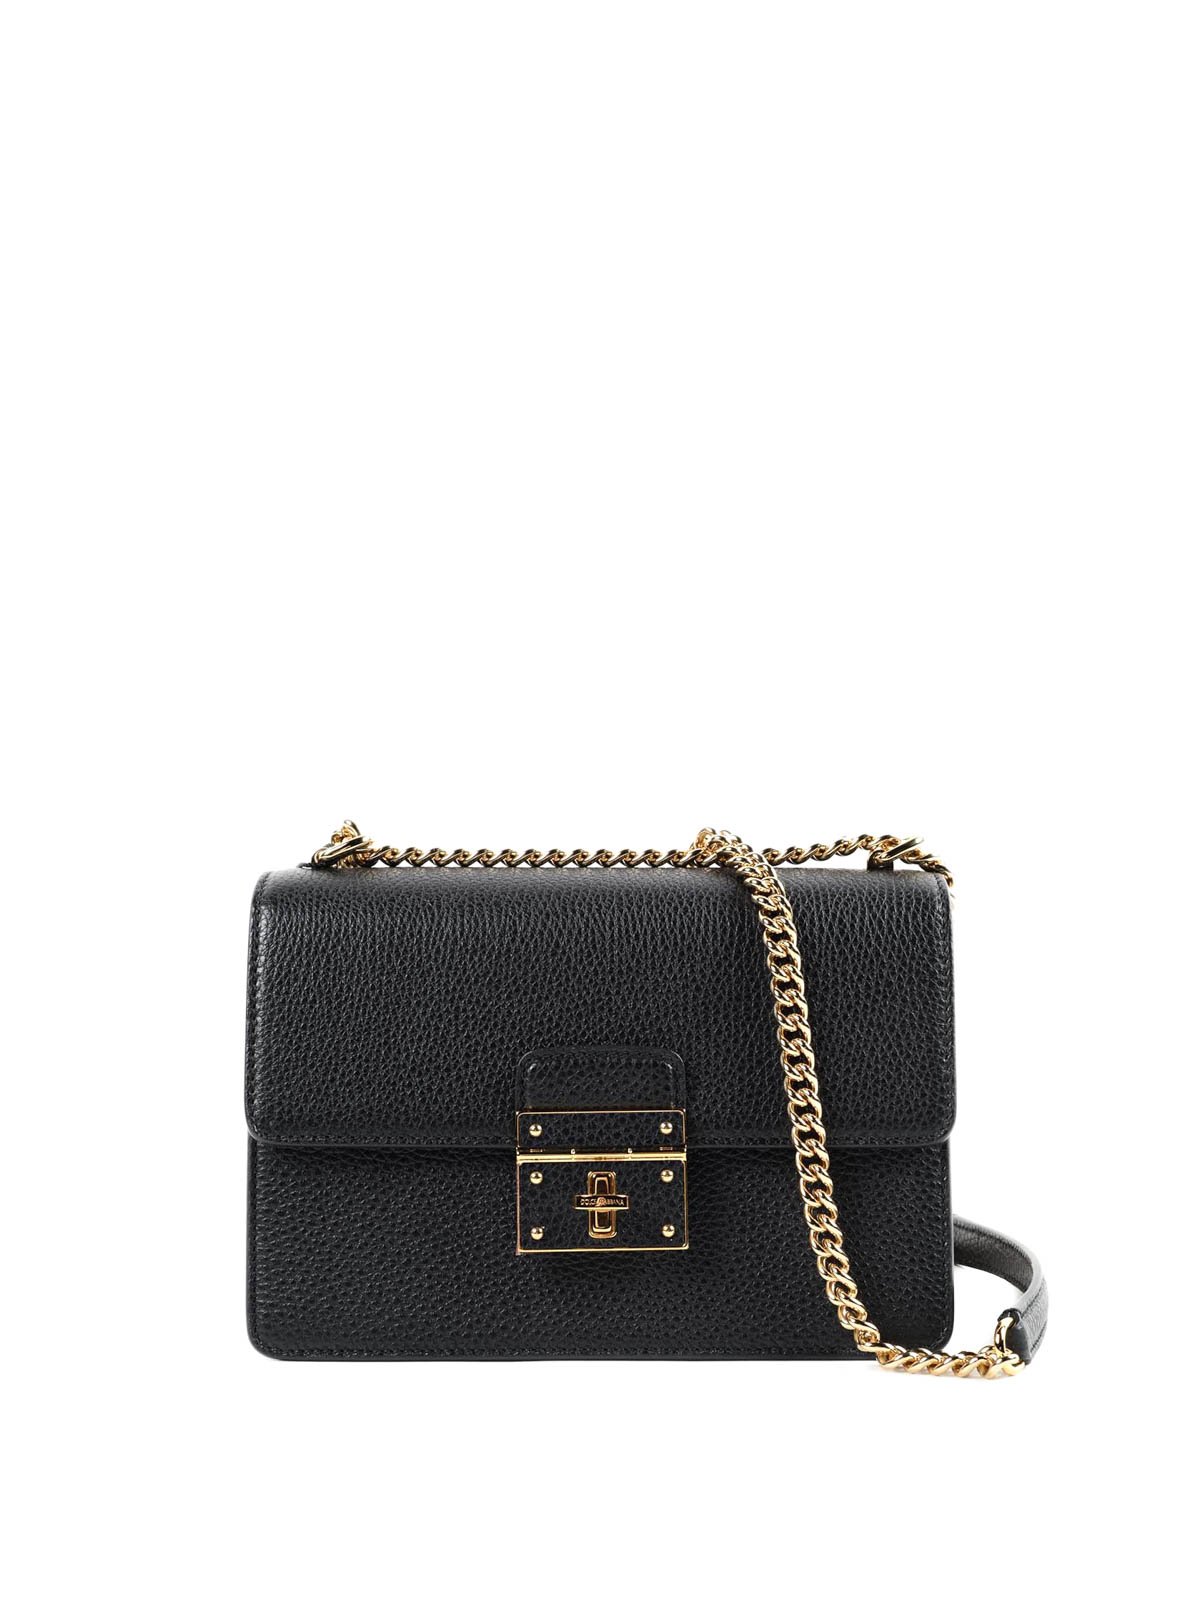 Cross body bags Dolce & Gabbana - Hammered leather cross body bag ...